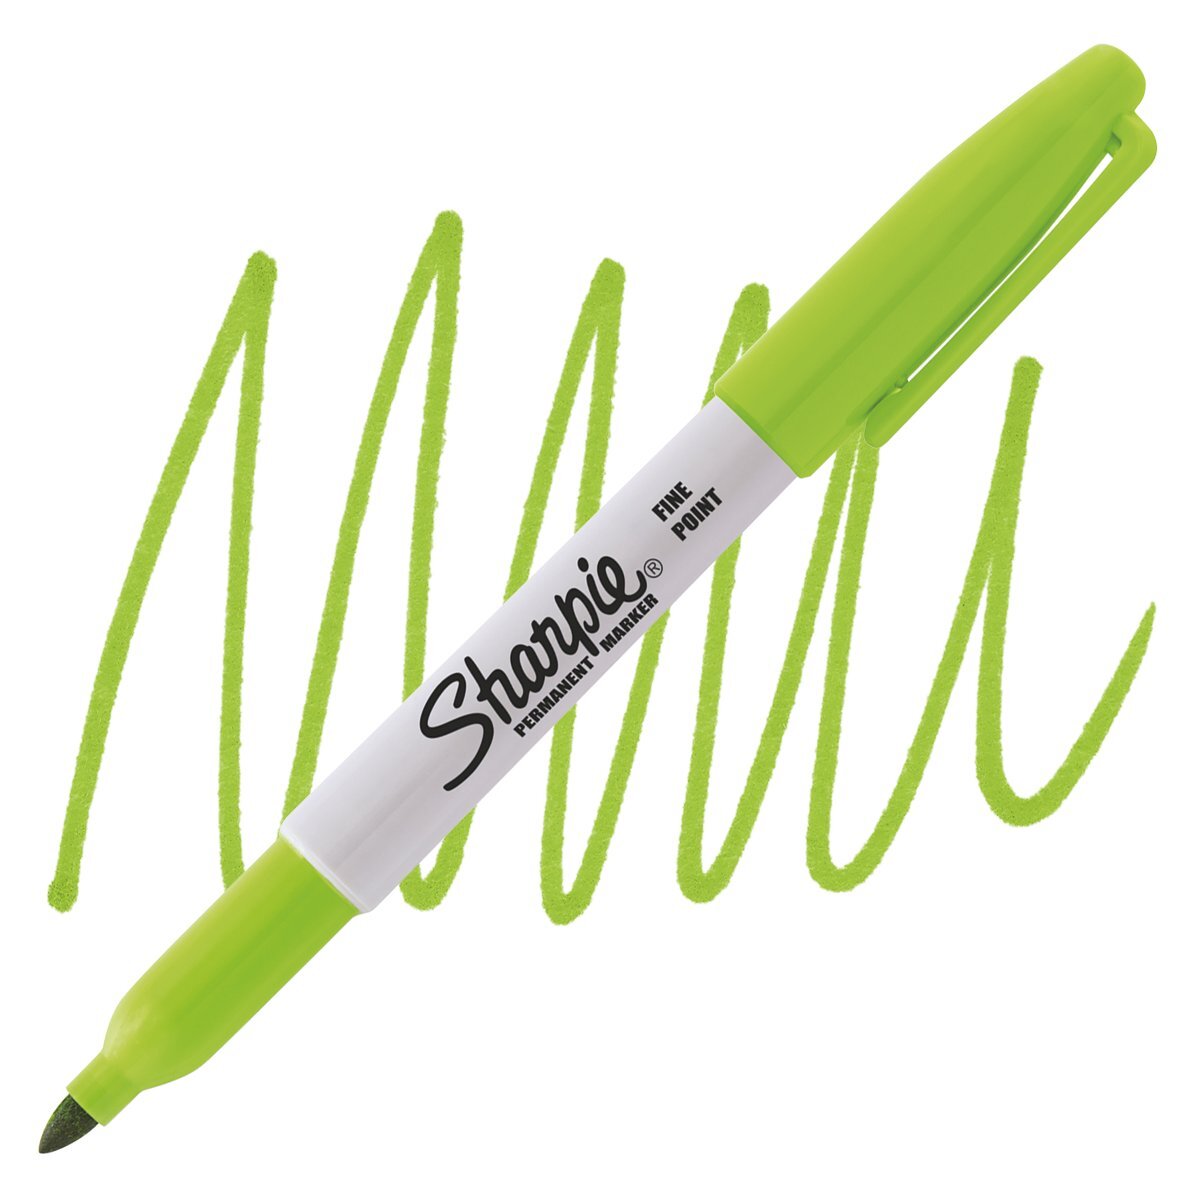 Sharpie Fine Point Permanent Markers - Assorted Colors, Set of 12